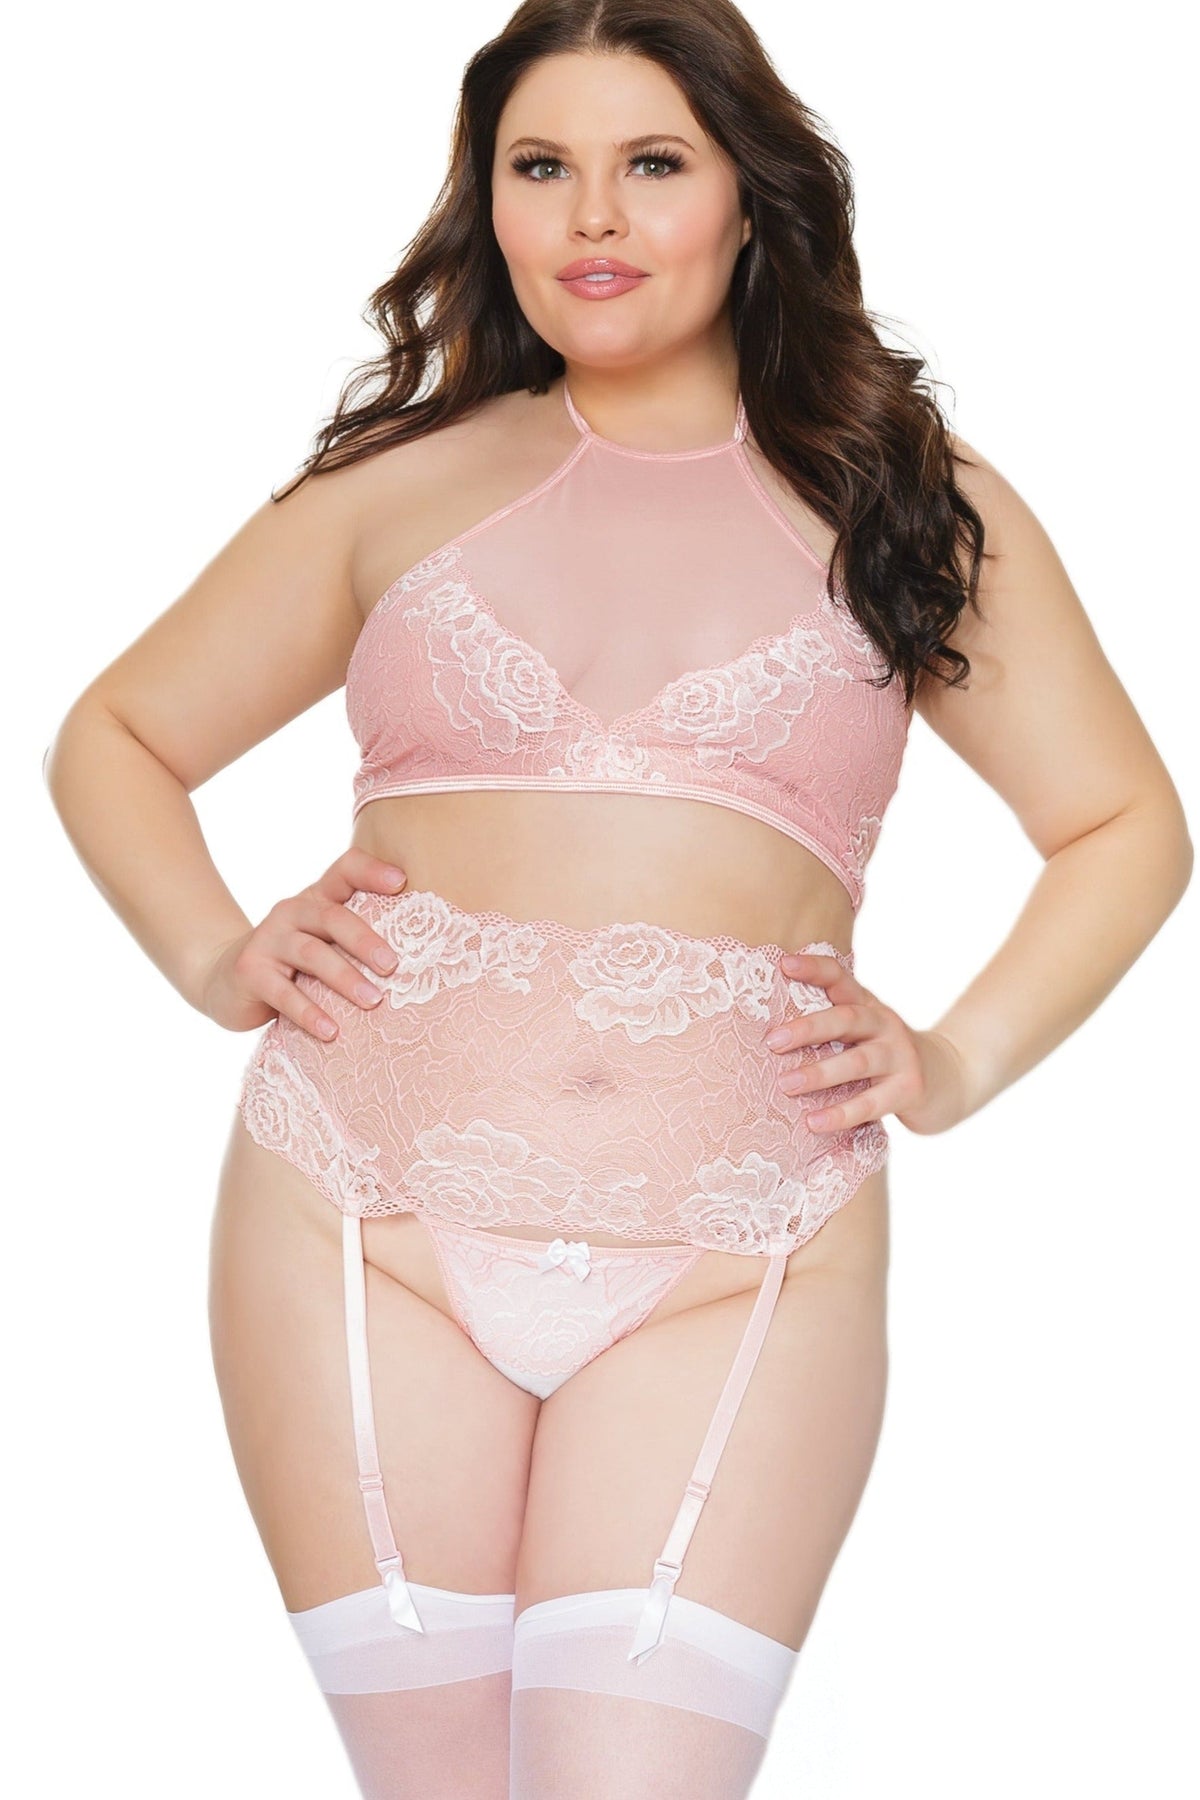 Lace Halter Crop Top And Matching G-String | Plus Size